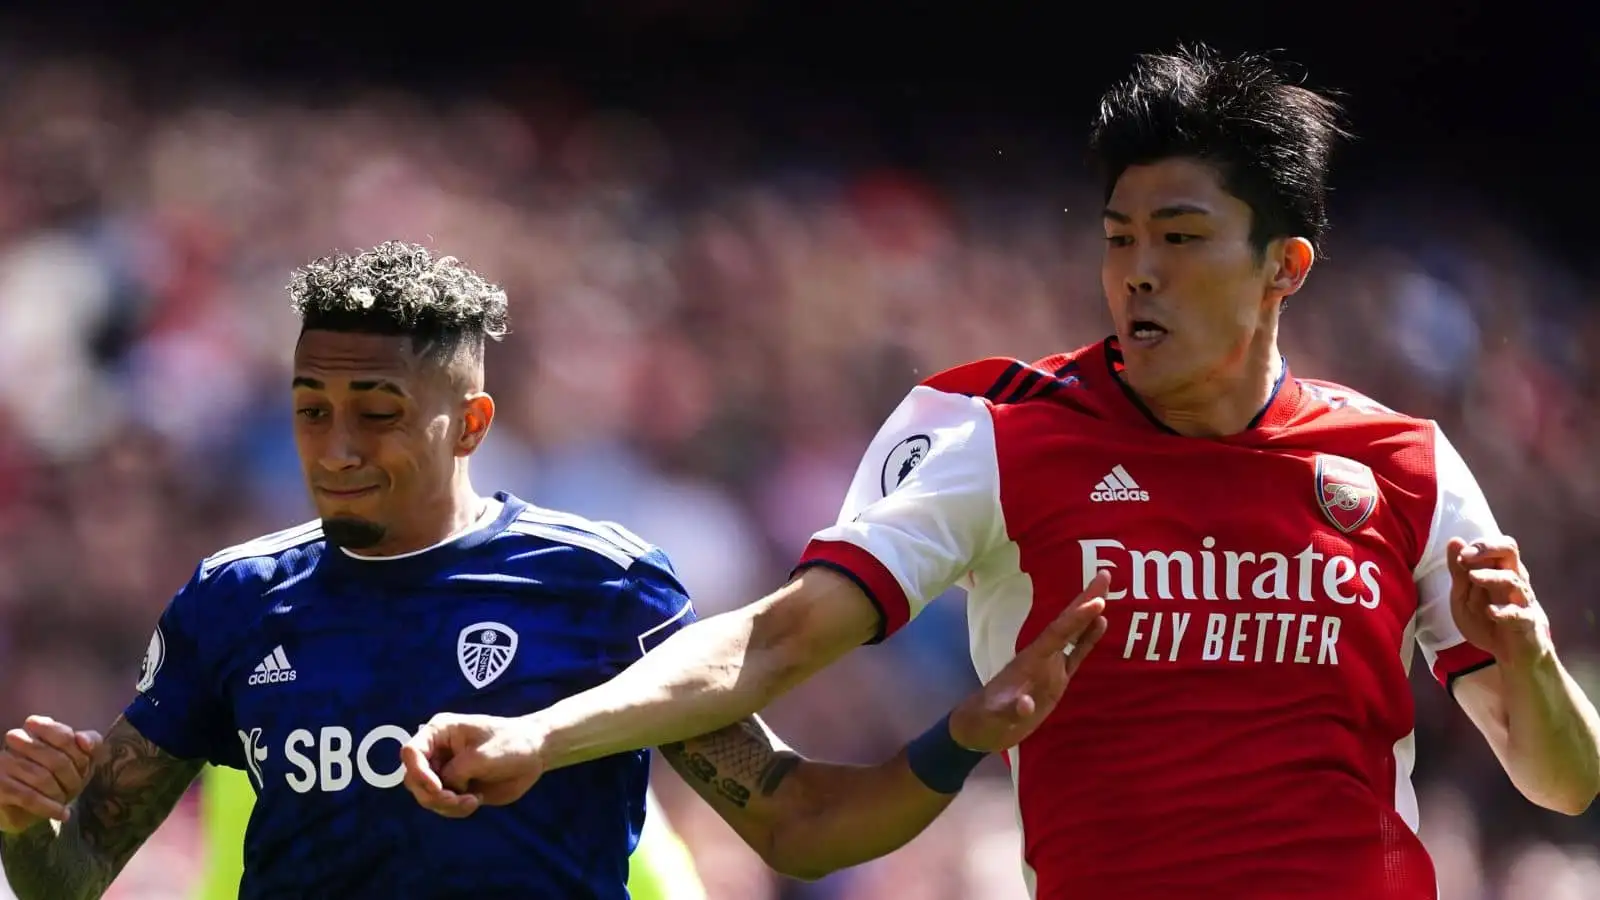 Raphinha of Leeds United and Arsenal's Takehiro Tomiyasu battle for the ball during the Premier League match at the Emirates Stadium, London